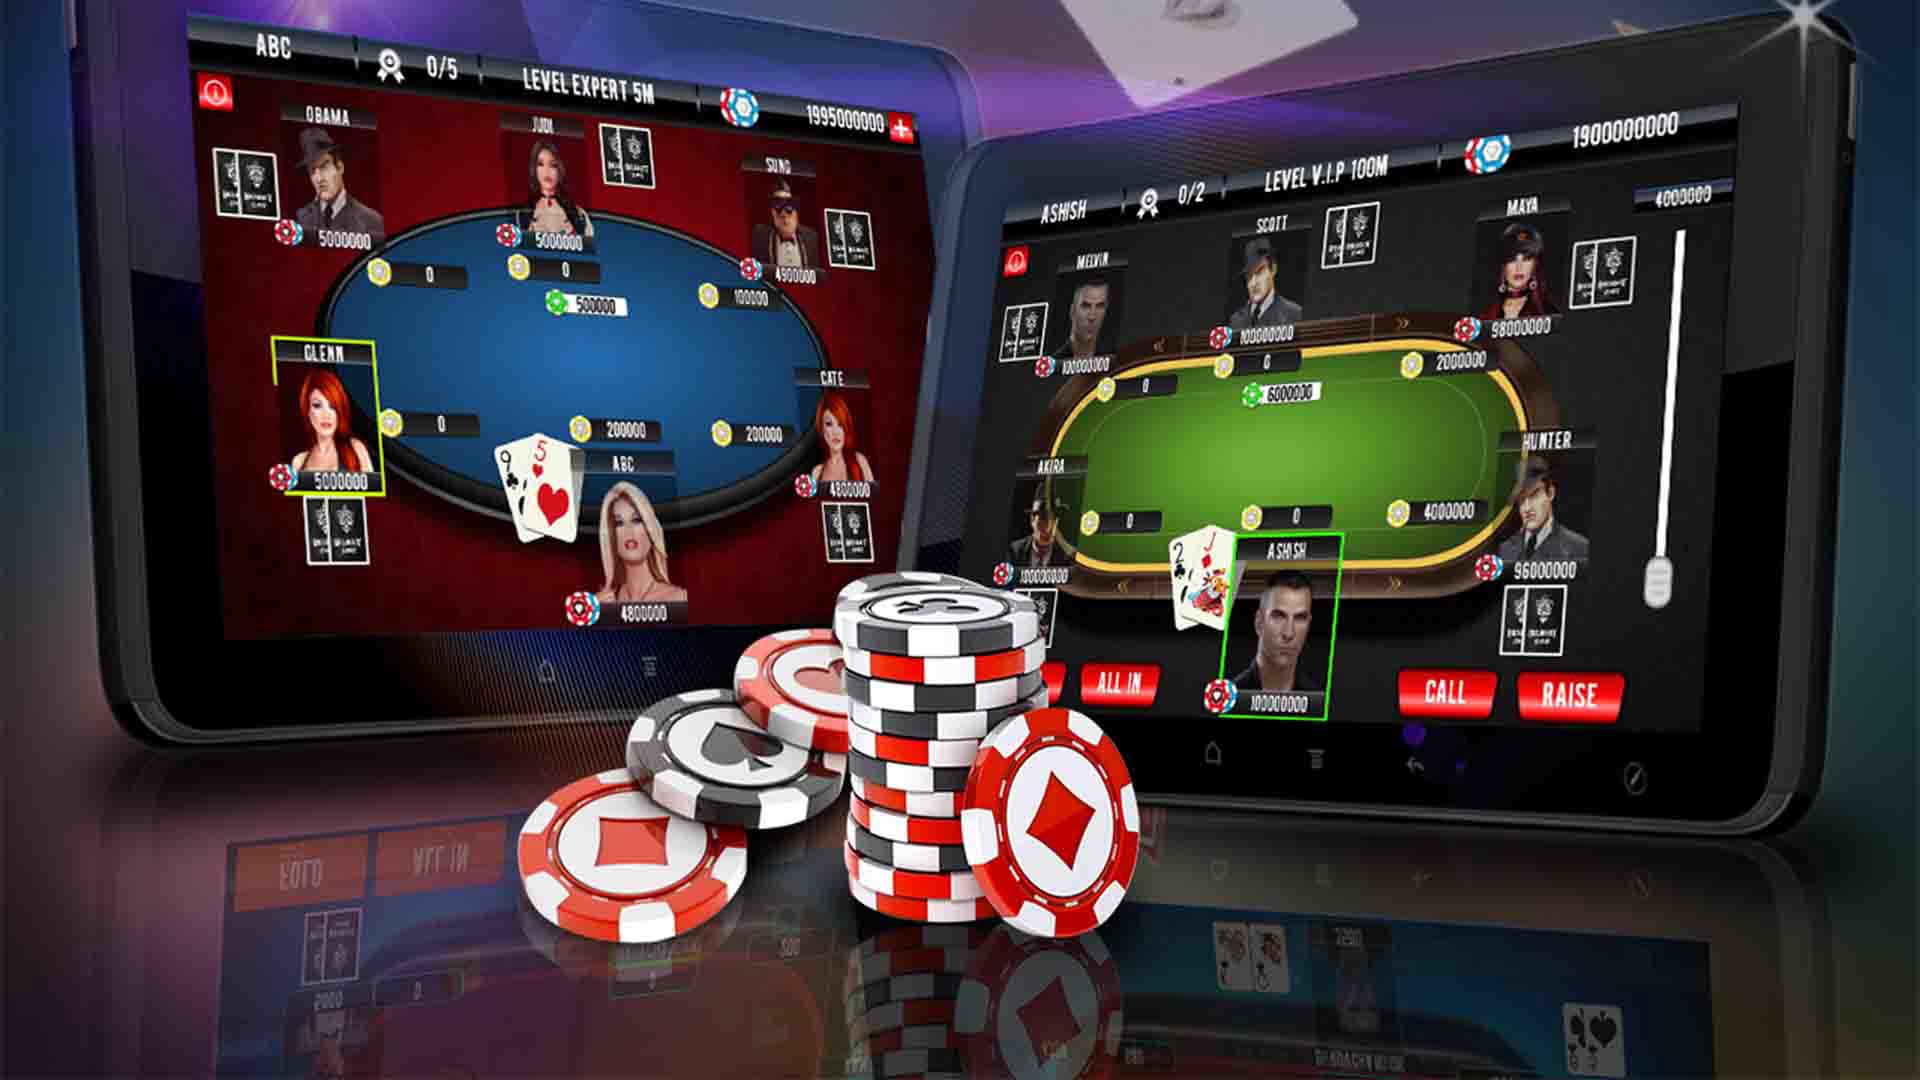 Discover Why You Need The Expert Casino Site To Land Your Big Pay Day Here